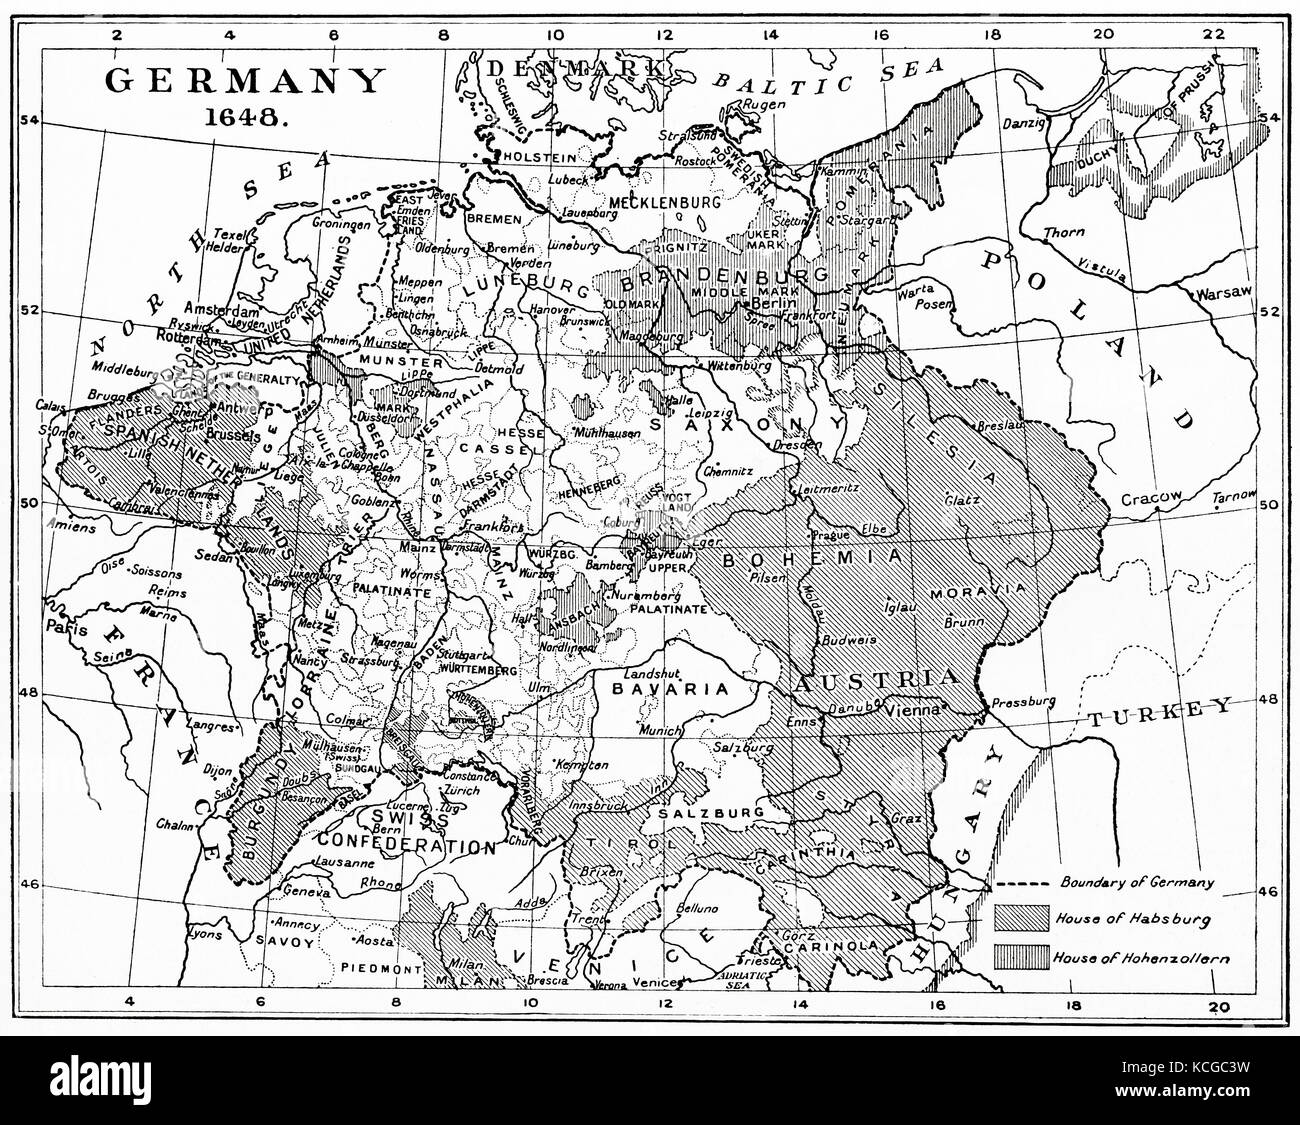 Map of Germany in 1648 after the Peace of Westphalia.  From Hutchinson's History of the Nations, published 1915. Stock Photo